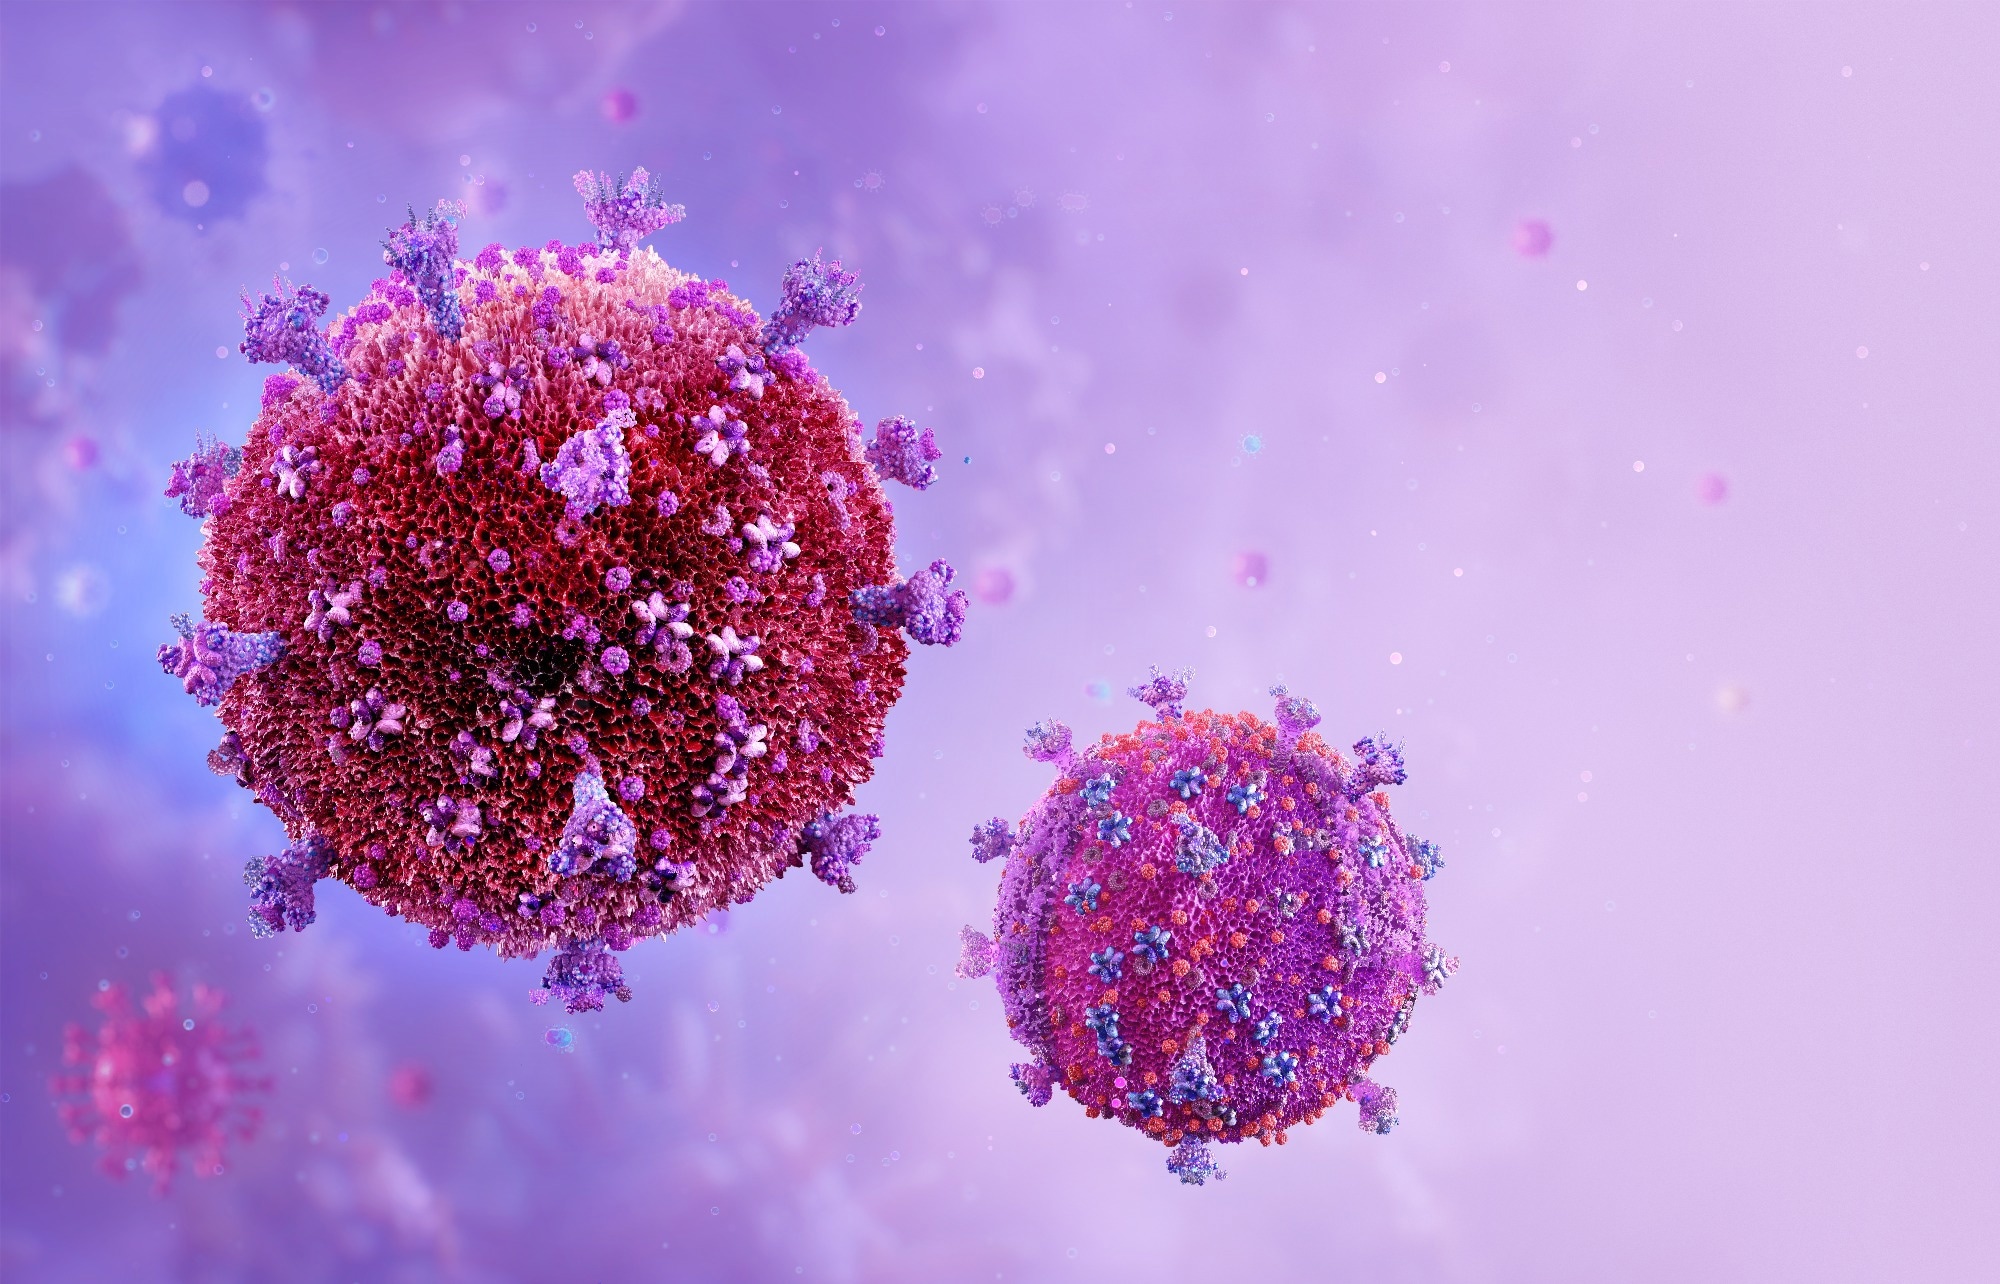 Study: Mpox in people with advanced HIV infection: a global case series. Image Credit: Corona Borealis Studio/Shutterstock